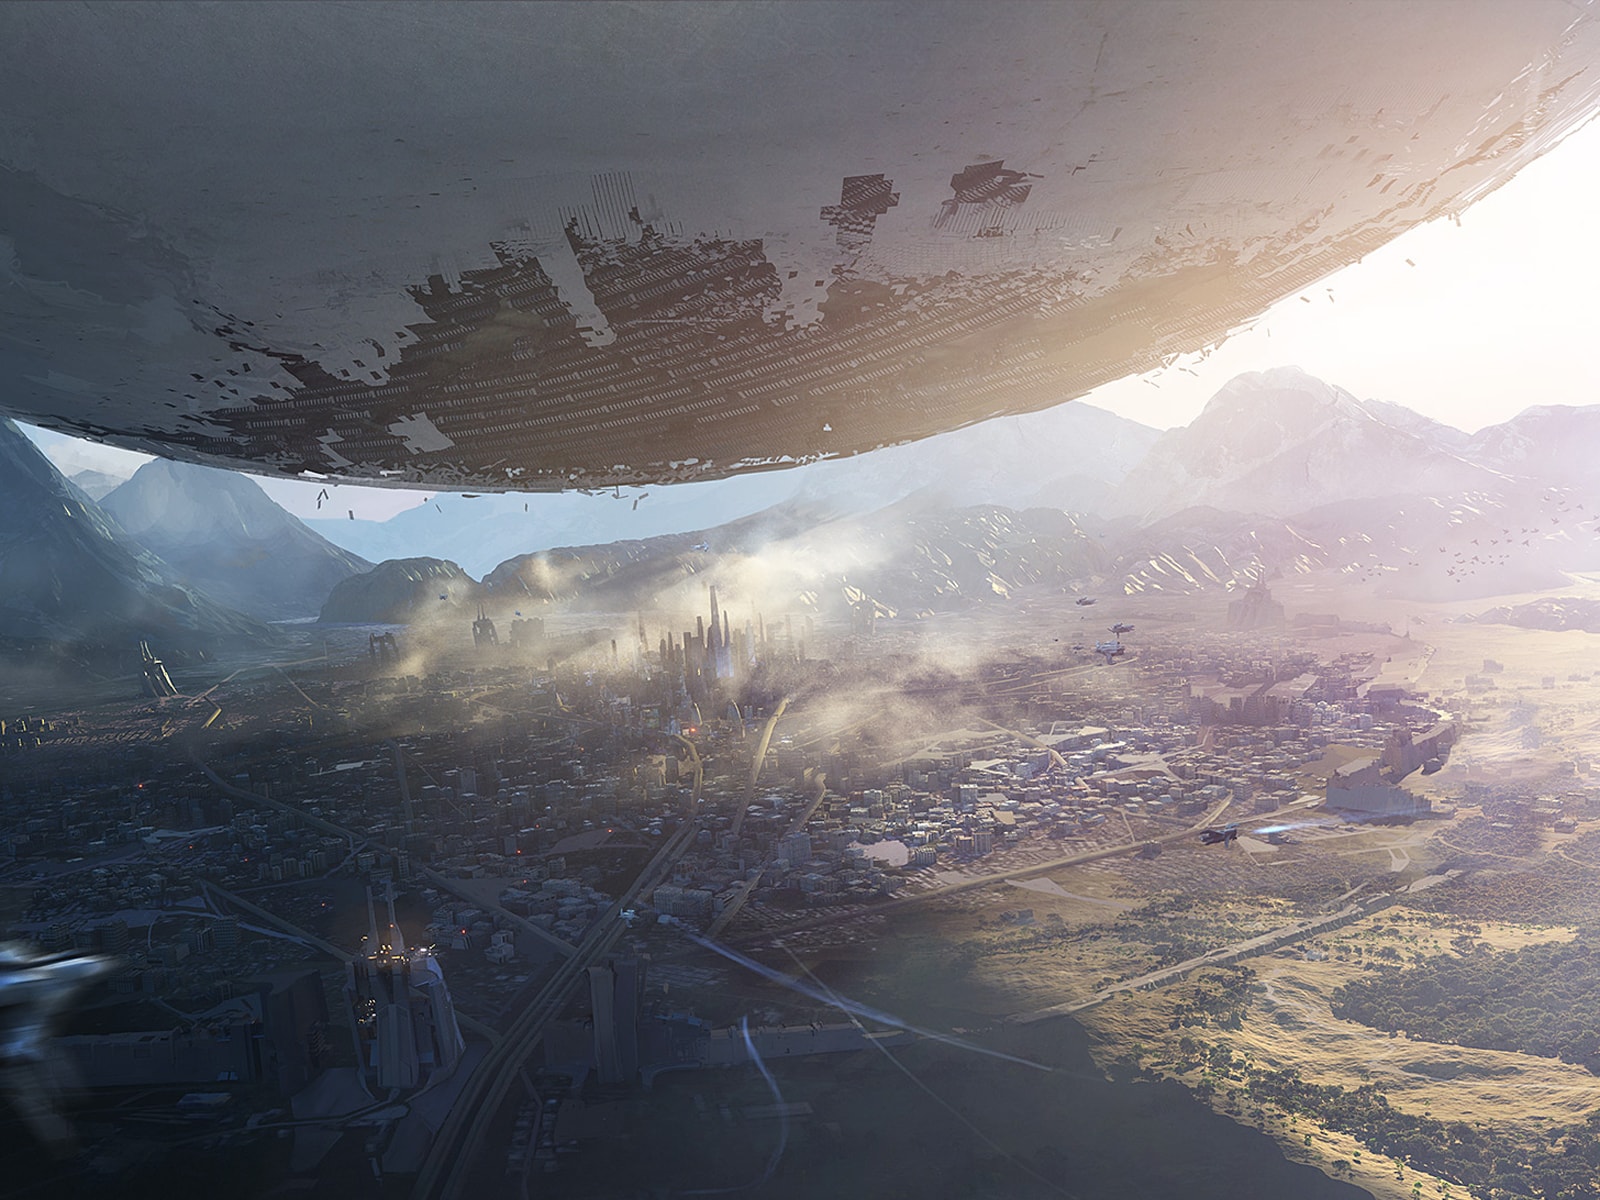 Screenshot from Destiny of an alien spaceship, called the Traveler, hovering over the last city